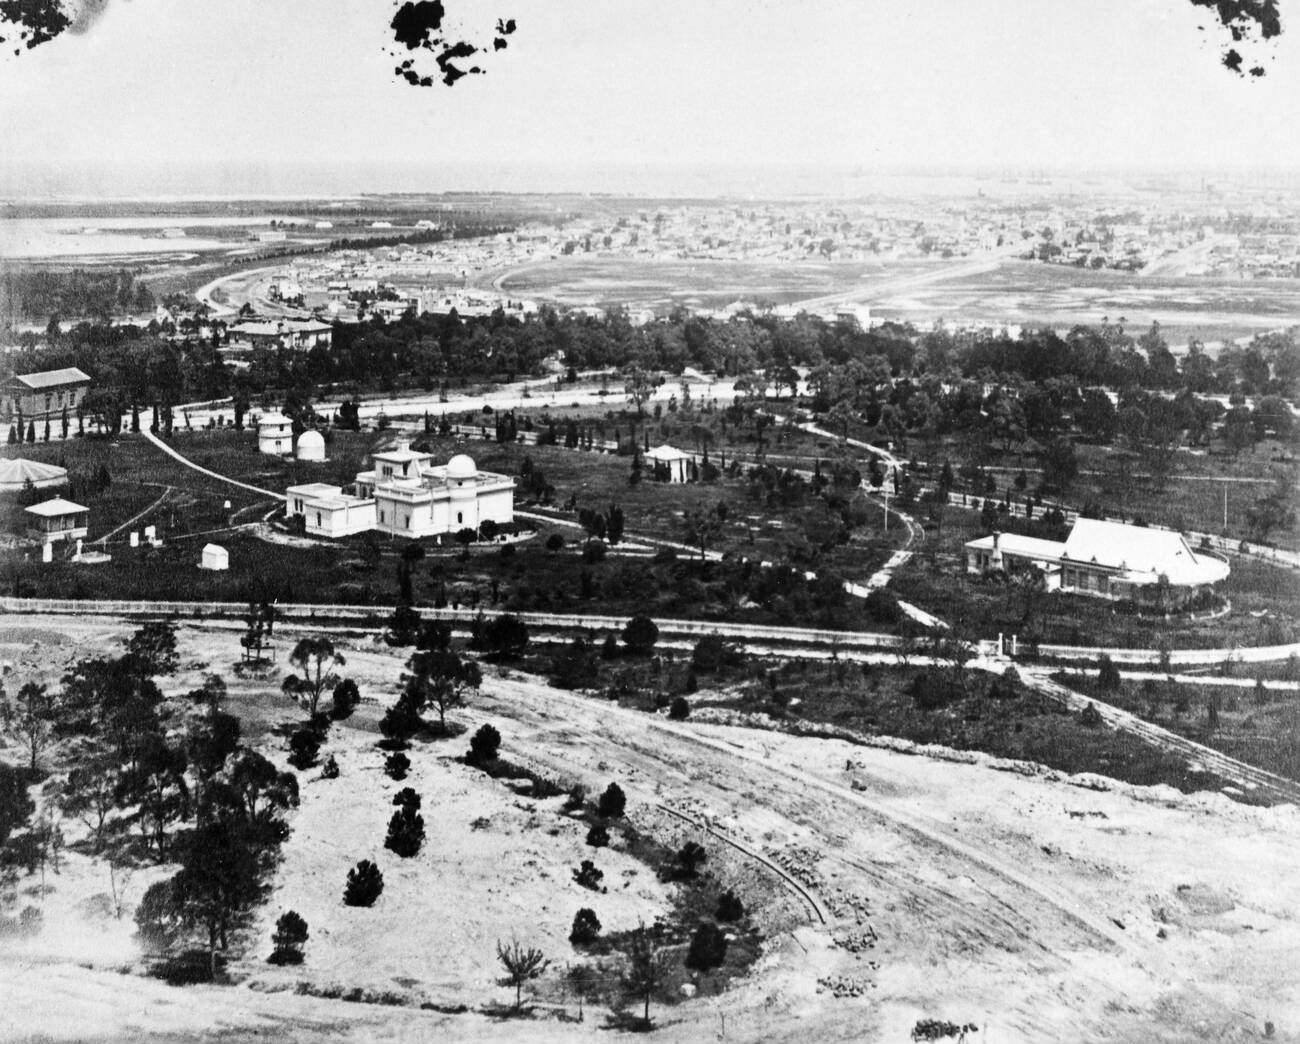 View of the outskirts of the city of Melbourne, 1880s